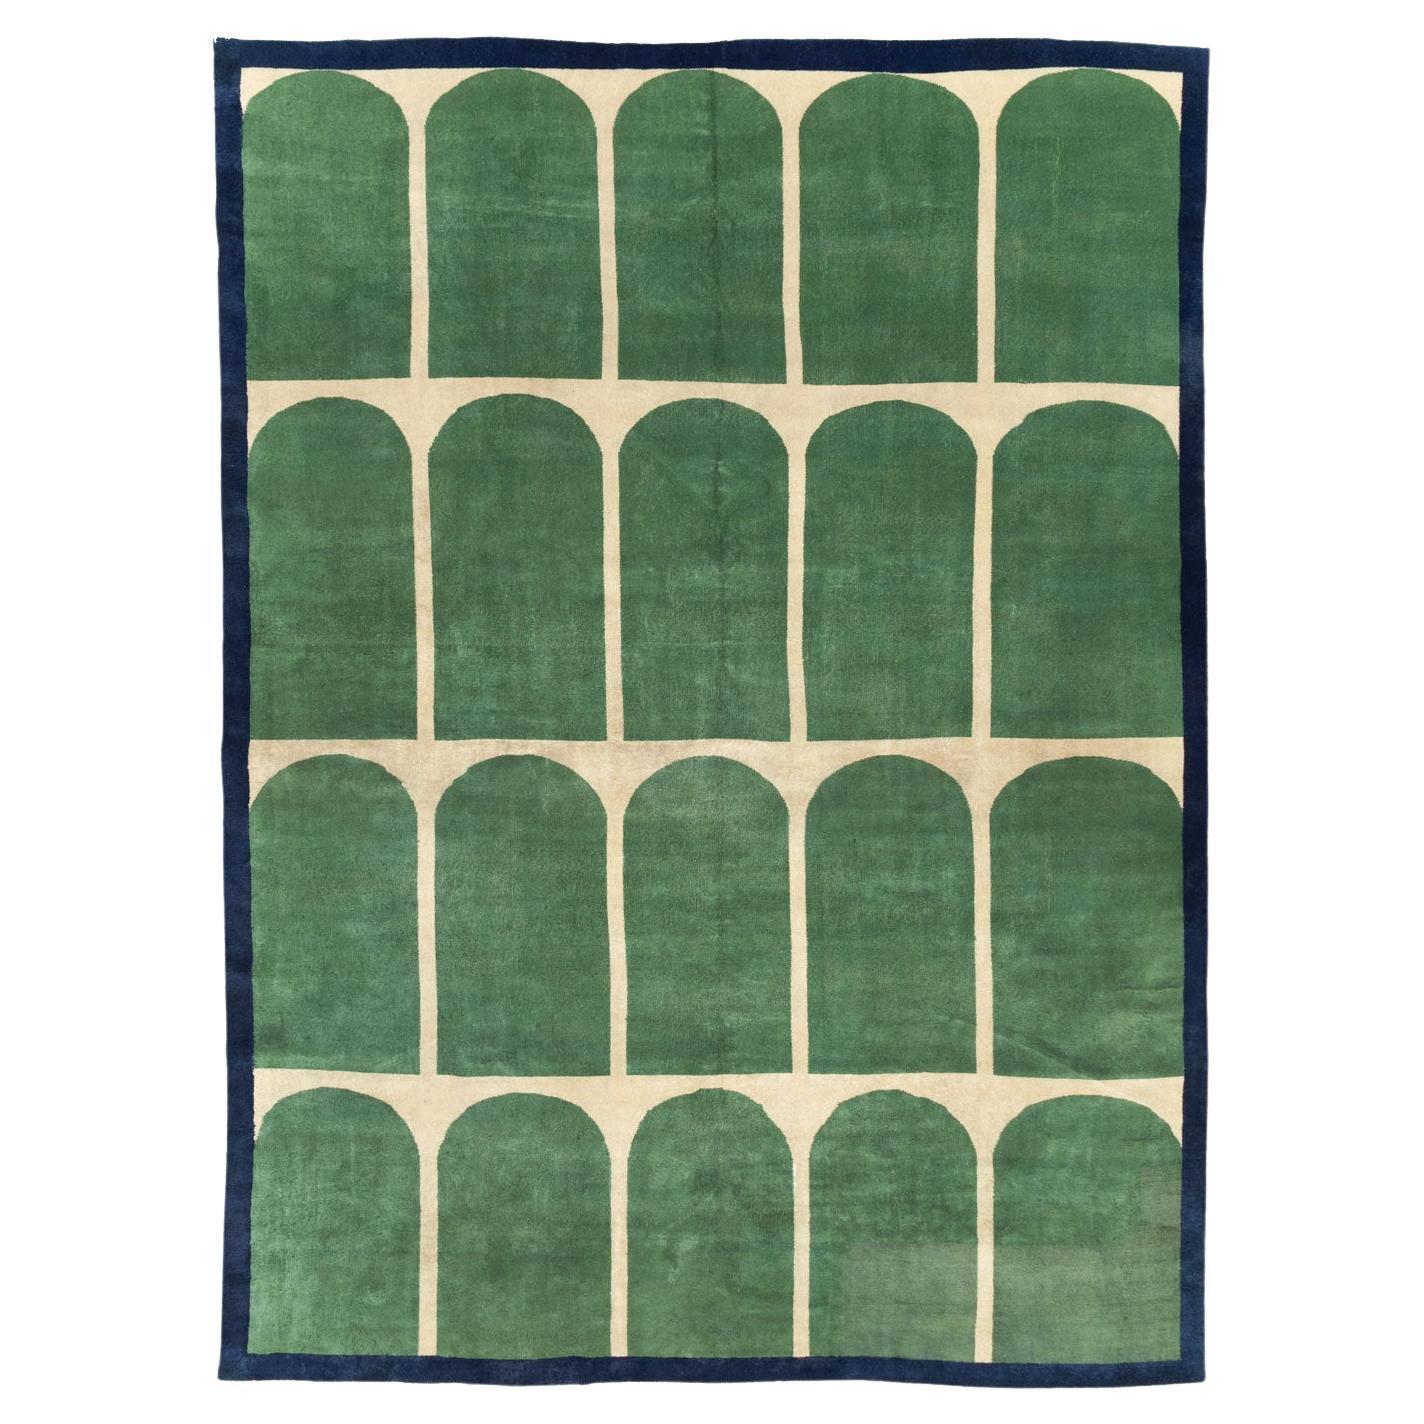 Mid-20th Century Turkish Art Deco Style Room Size Rug For Sale